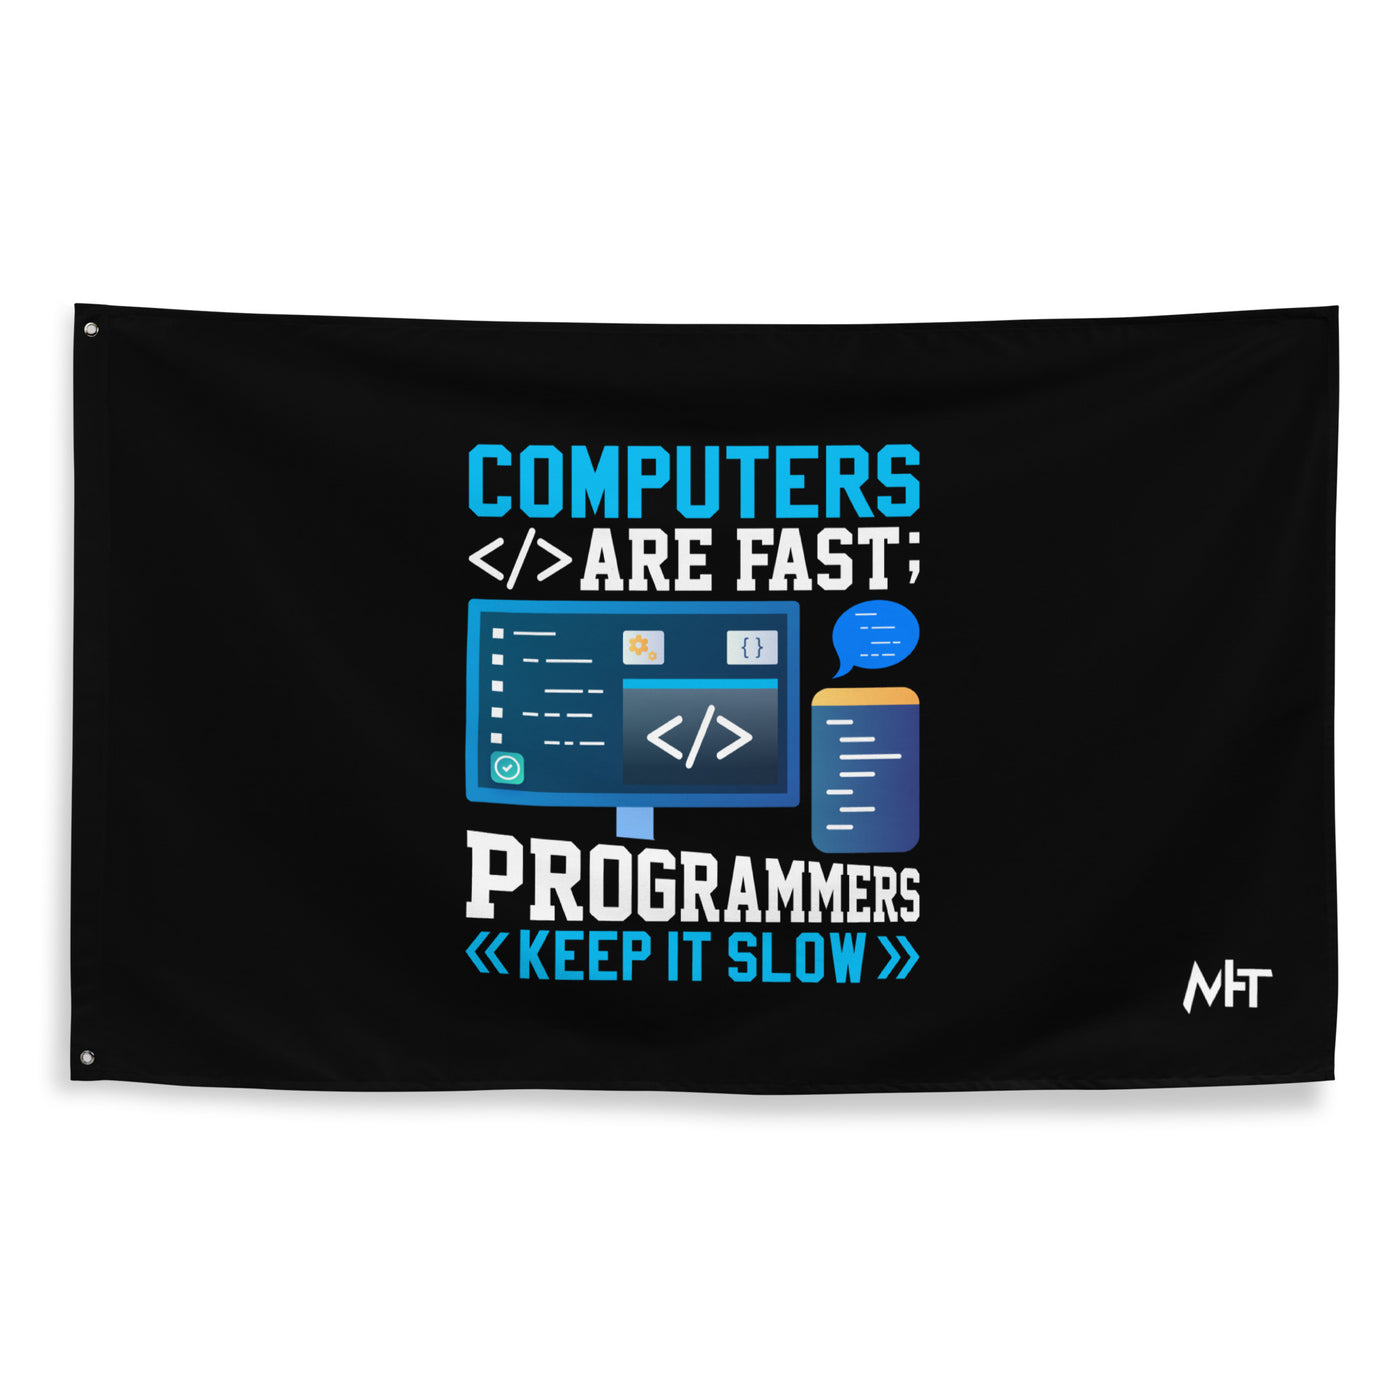 Computers are fast - Blue RK Flag